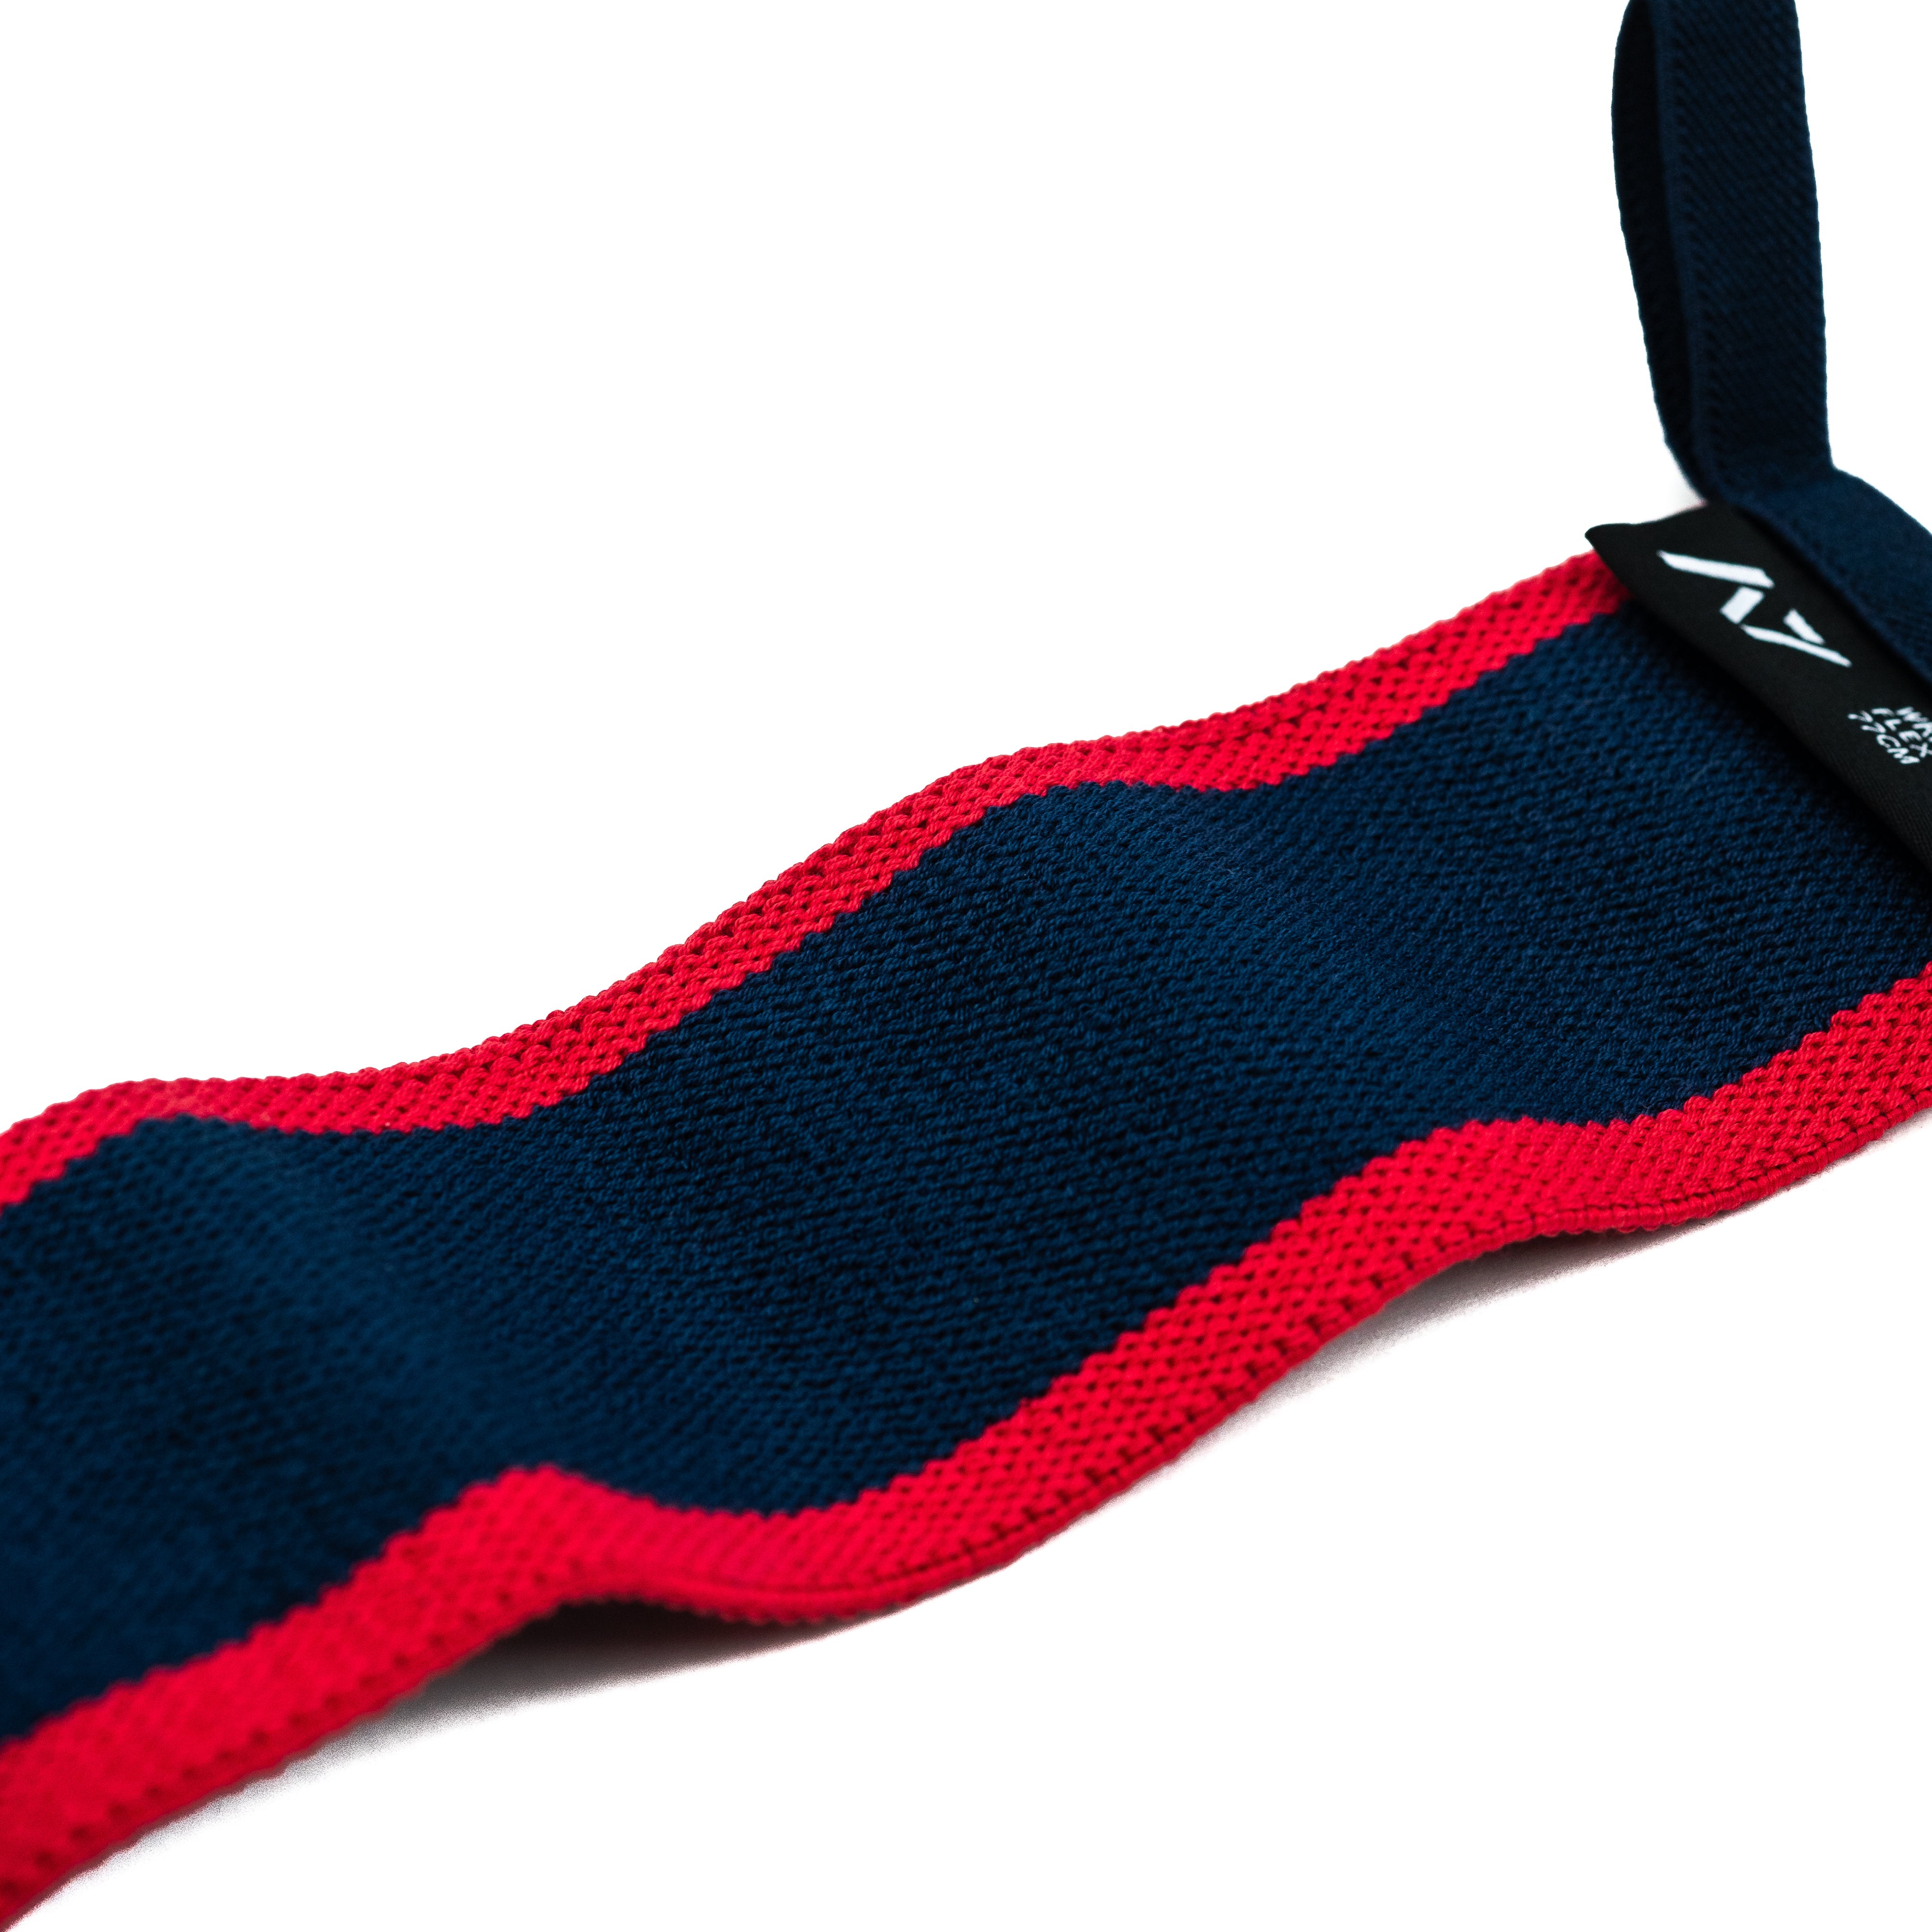 The Red, White & Blue (RWB) colourway stands out on the platform, while still providing the level of quality, support and comfort you demand from your products. These wrist wraps are a perfect addition to your IPF approved kit.